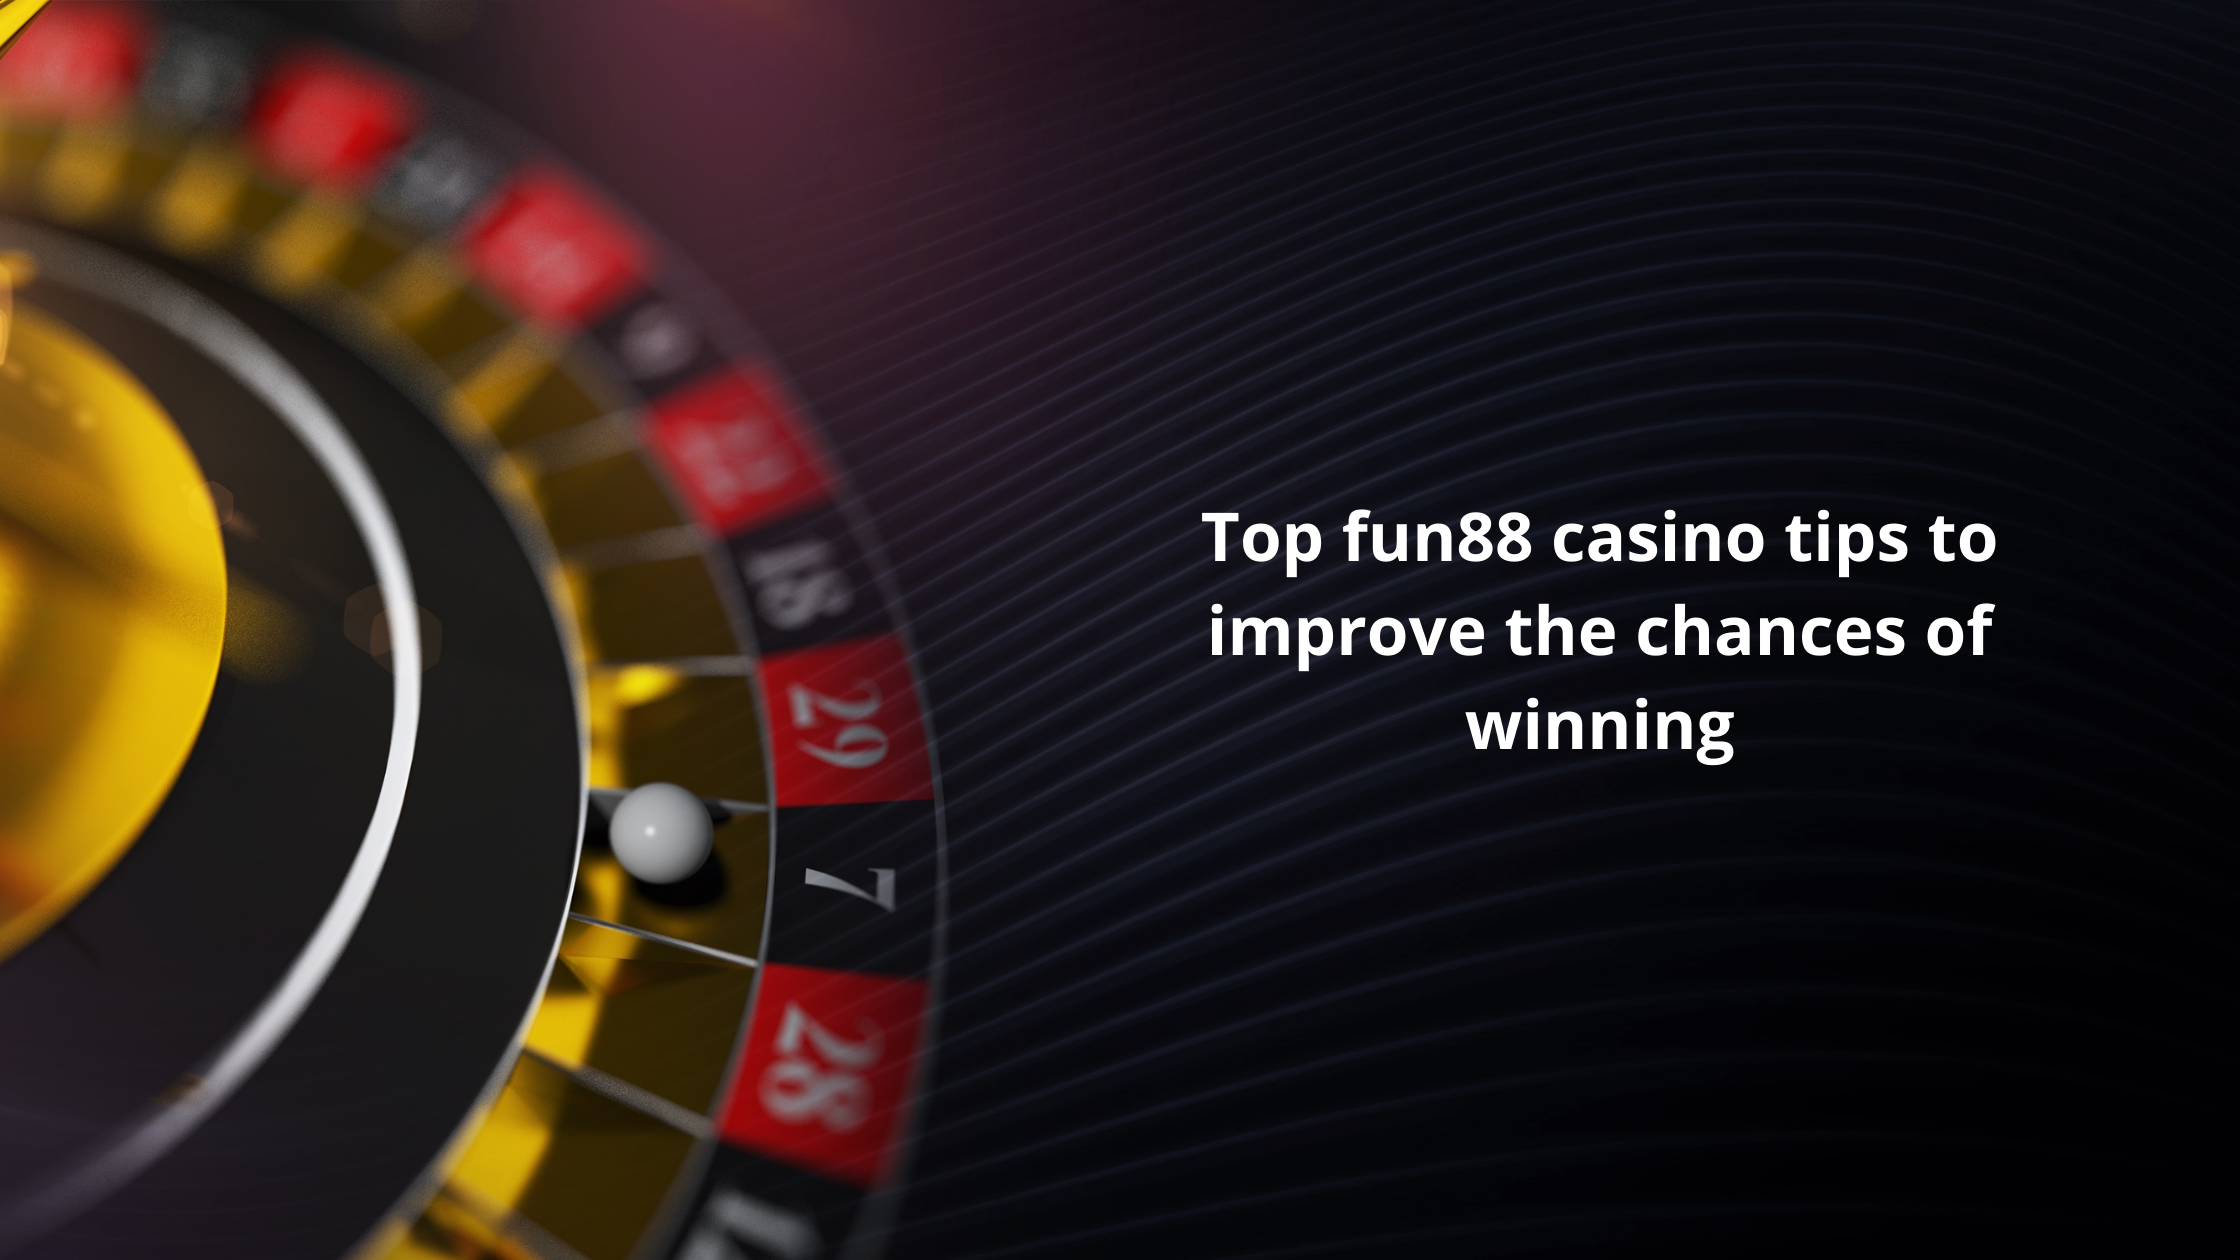 Top fun88 casino tips to improve the chances of winning